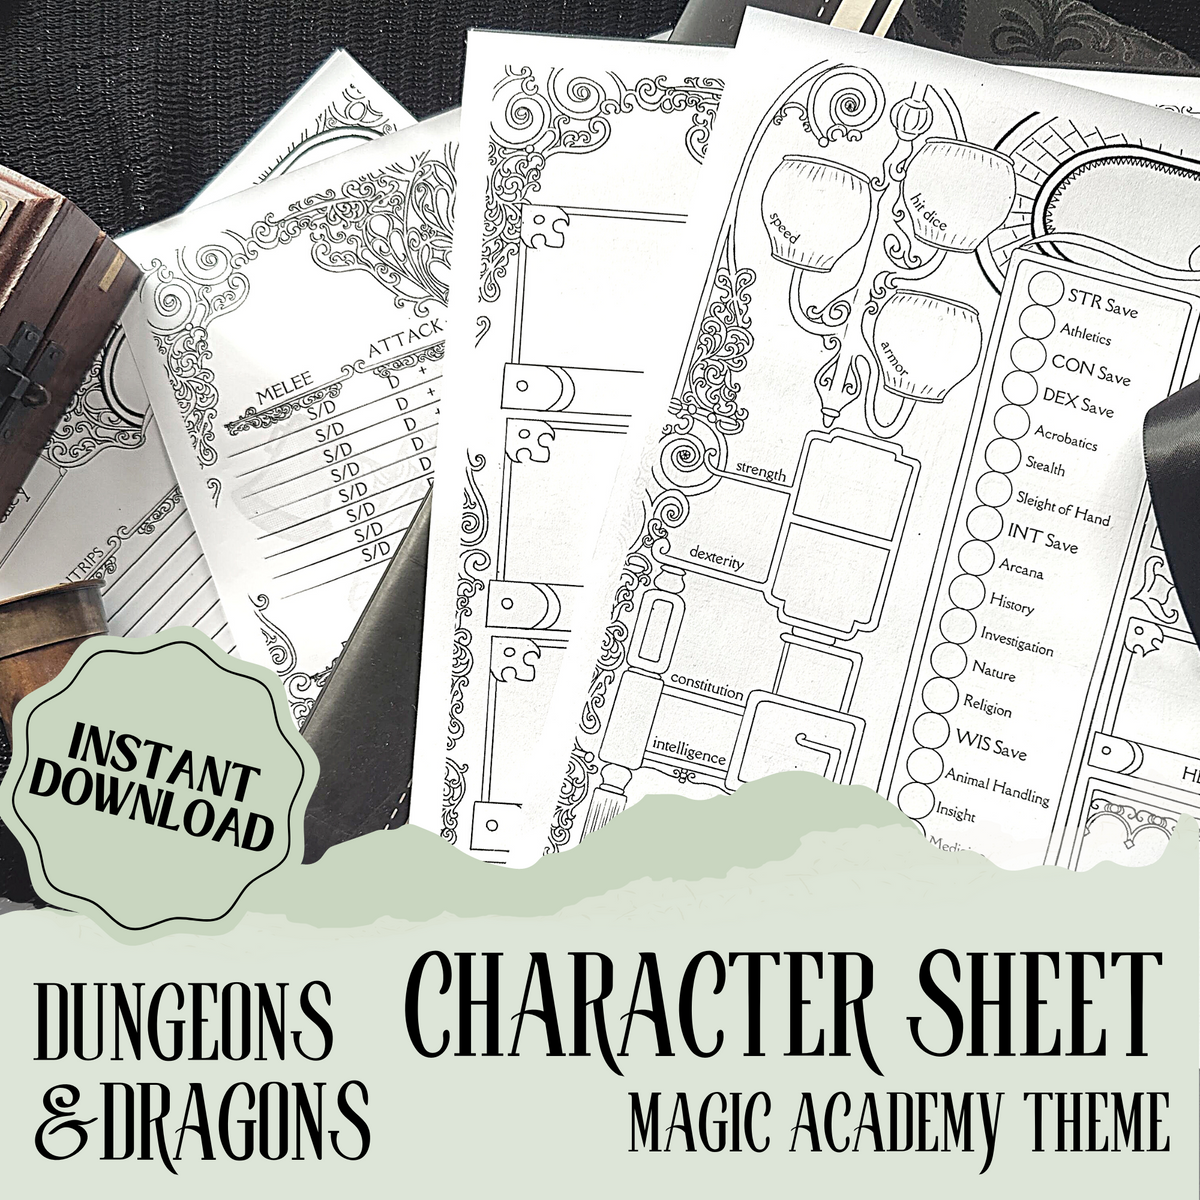 DnD Character Sheet | D&D Resources | Great for Dungeons and Dragons | Magic Academy Theme | Printable Character Journal